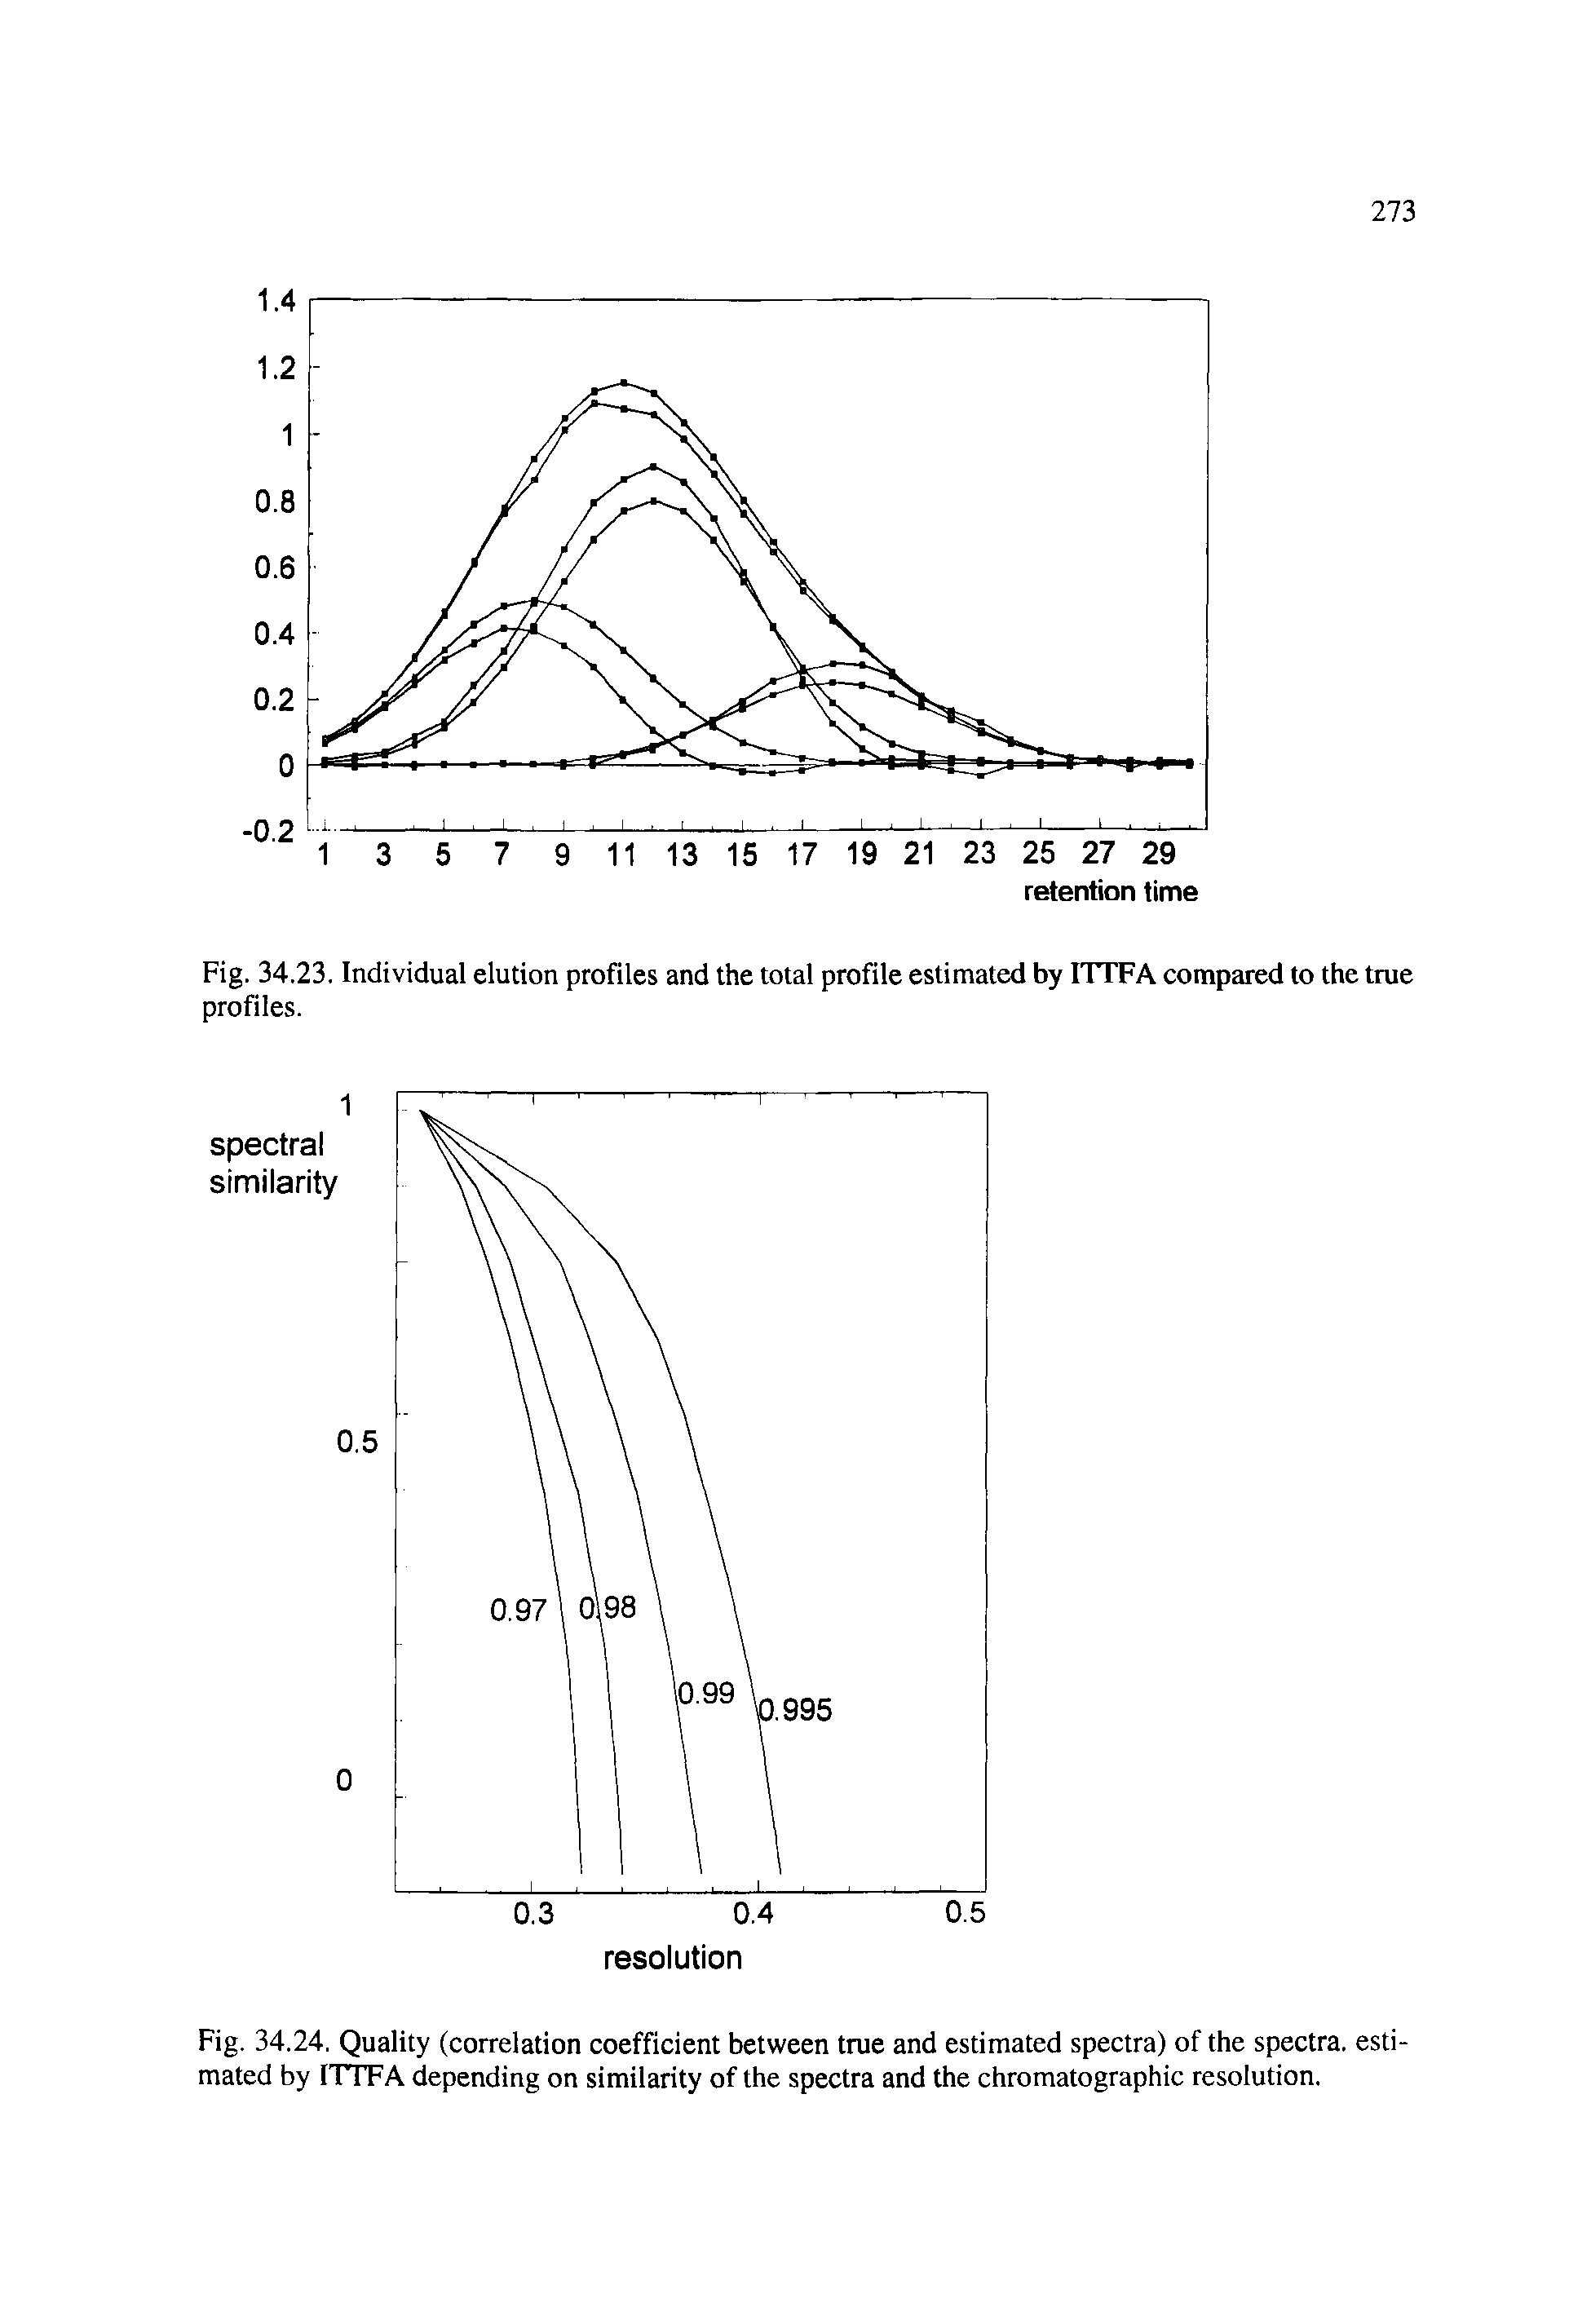 Fig. 34.24. Quality (correlation coefficient between true and estimated spectra) of the spectra, estimated by ITTFA depending on similarity of the spectra and the chromatographic resolution.